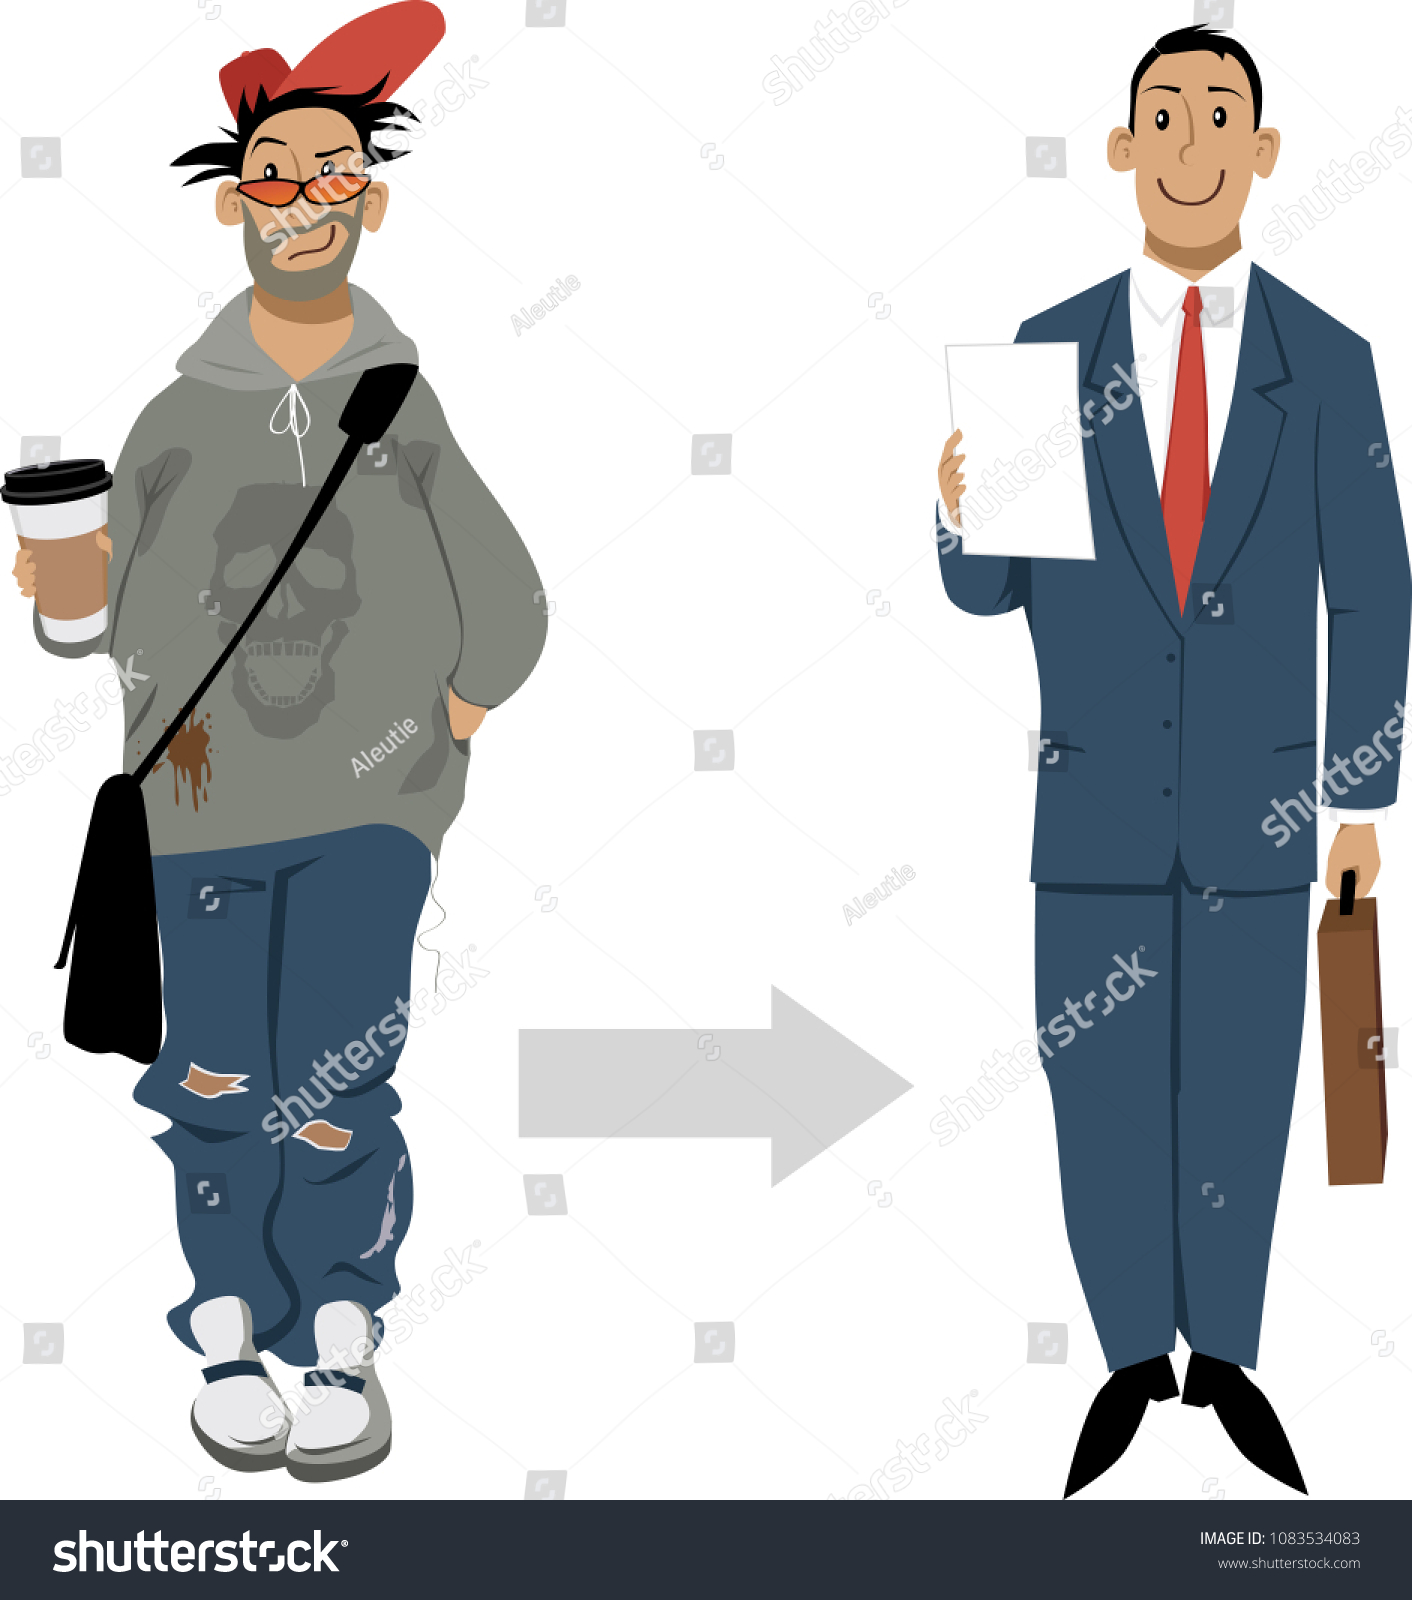 SVG of Preparation to a job interview for a young man, EPS 8 vector illustration svg